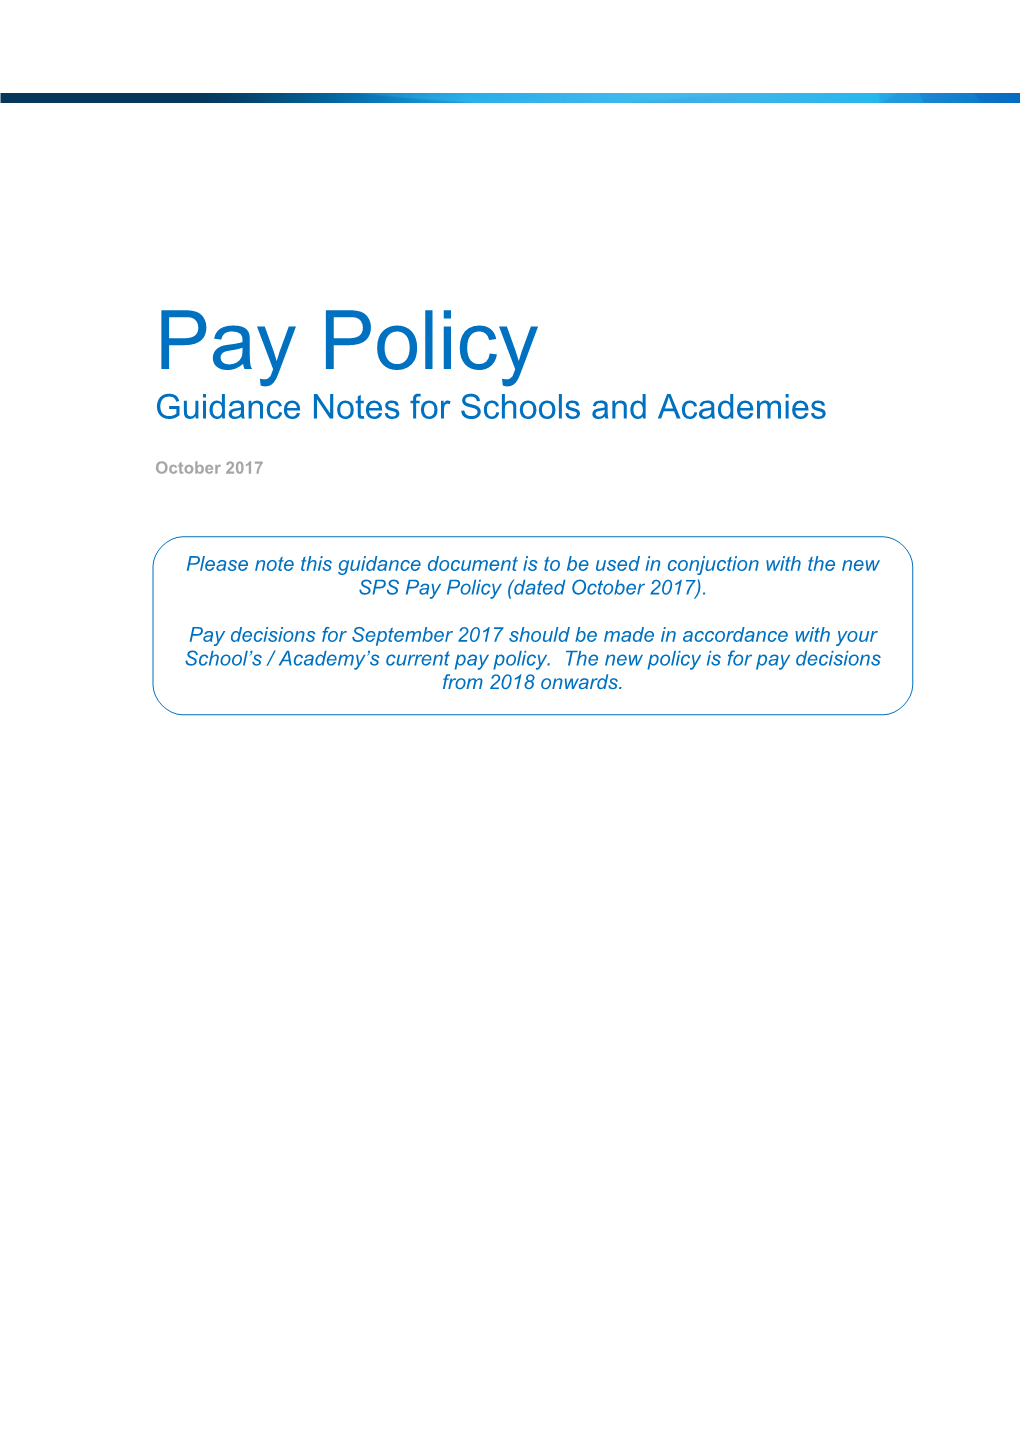 Guidance Notes for Schools and Academies